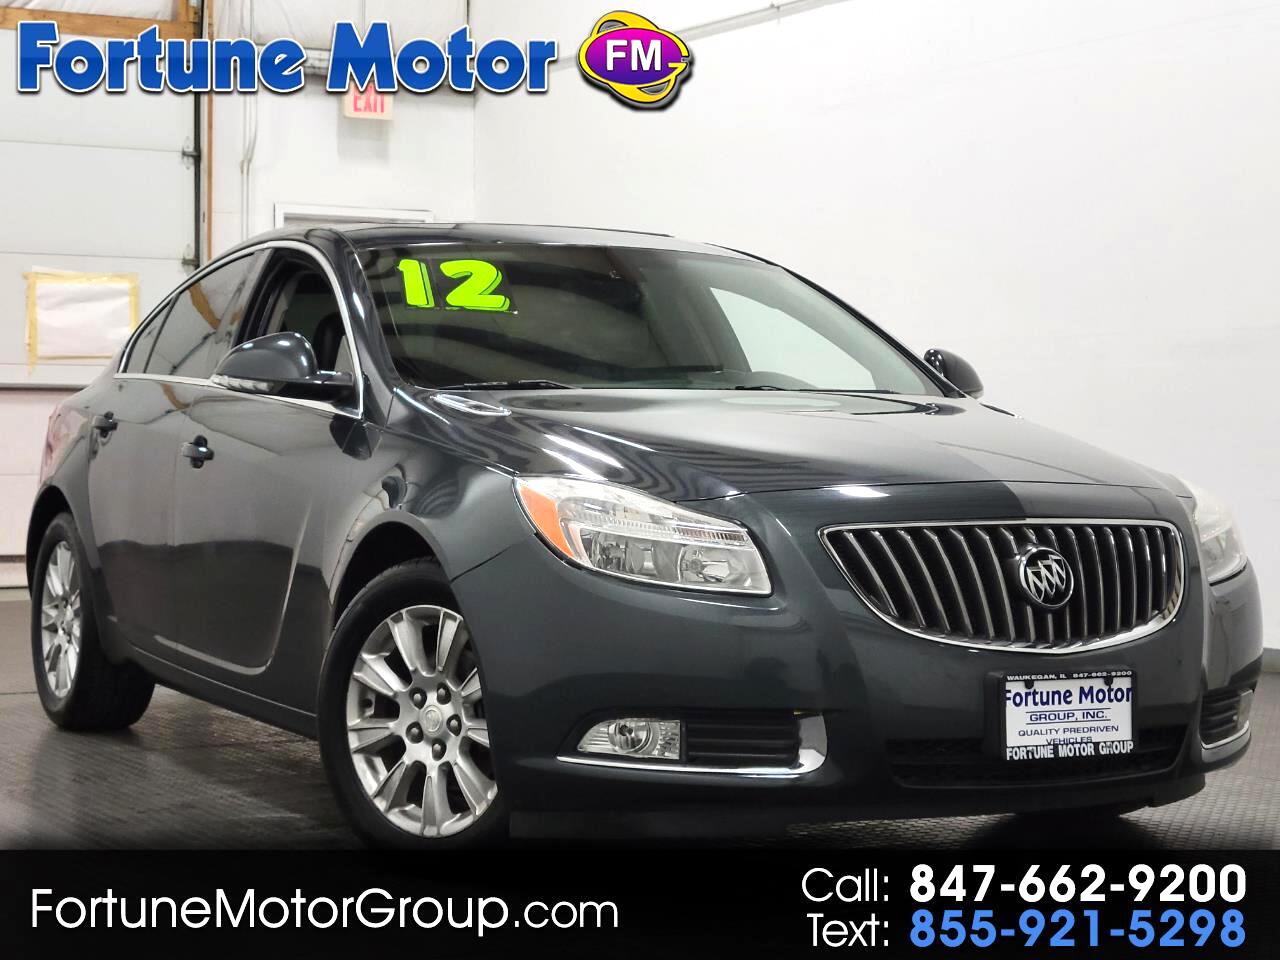 2012 Buick Regal 4dr Sdn Base